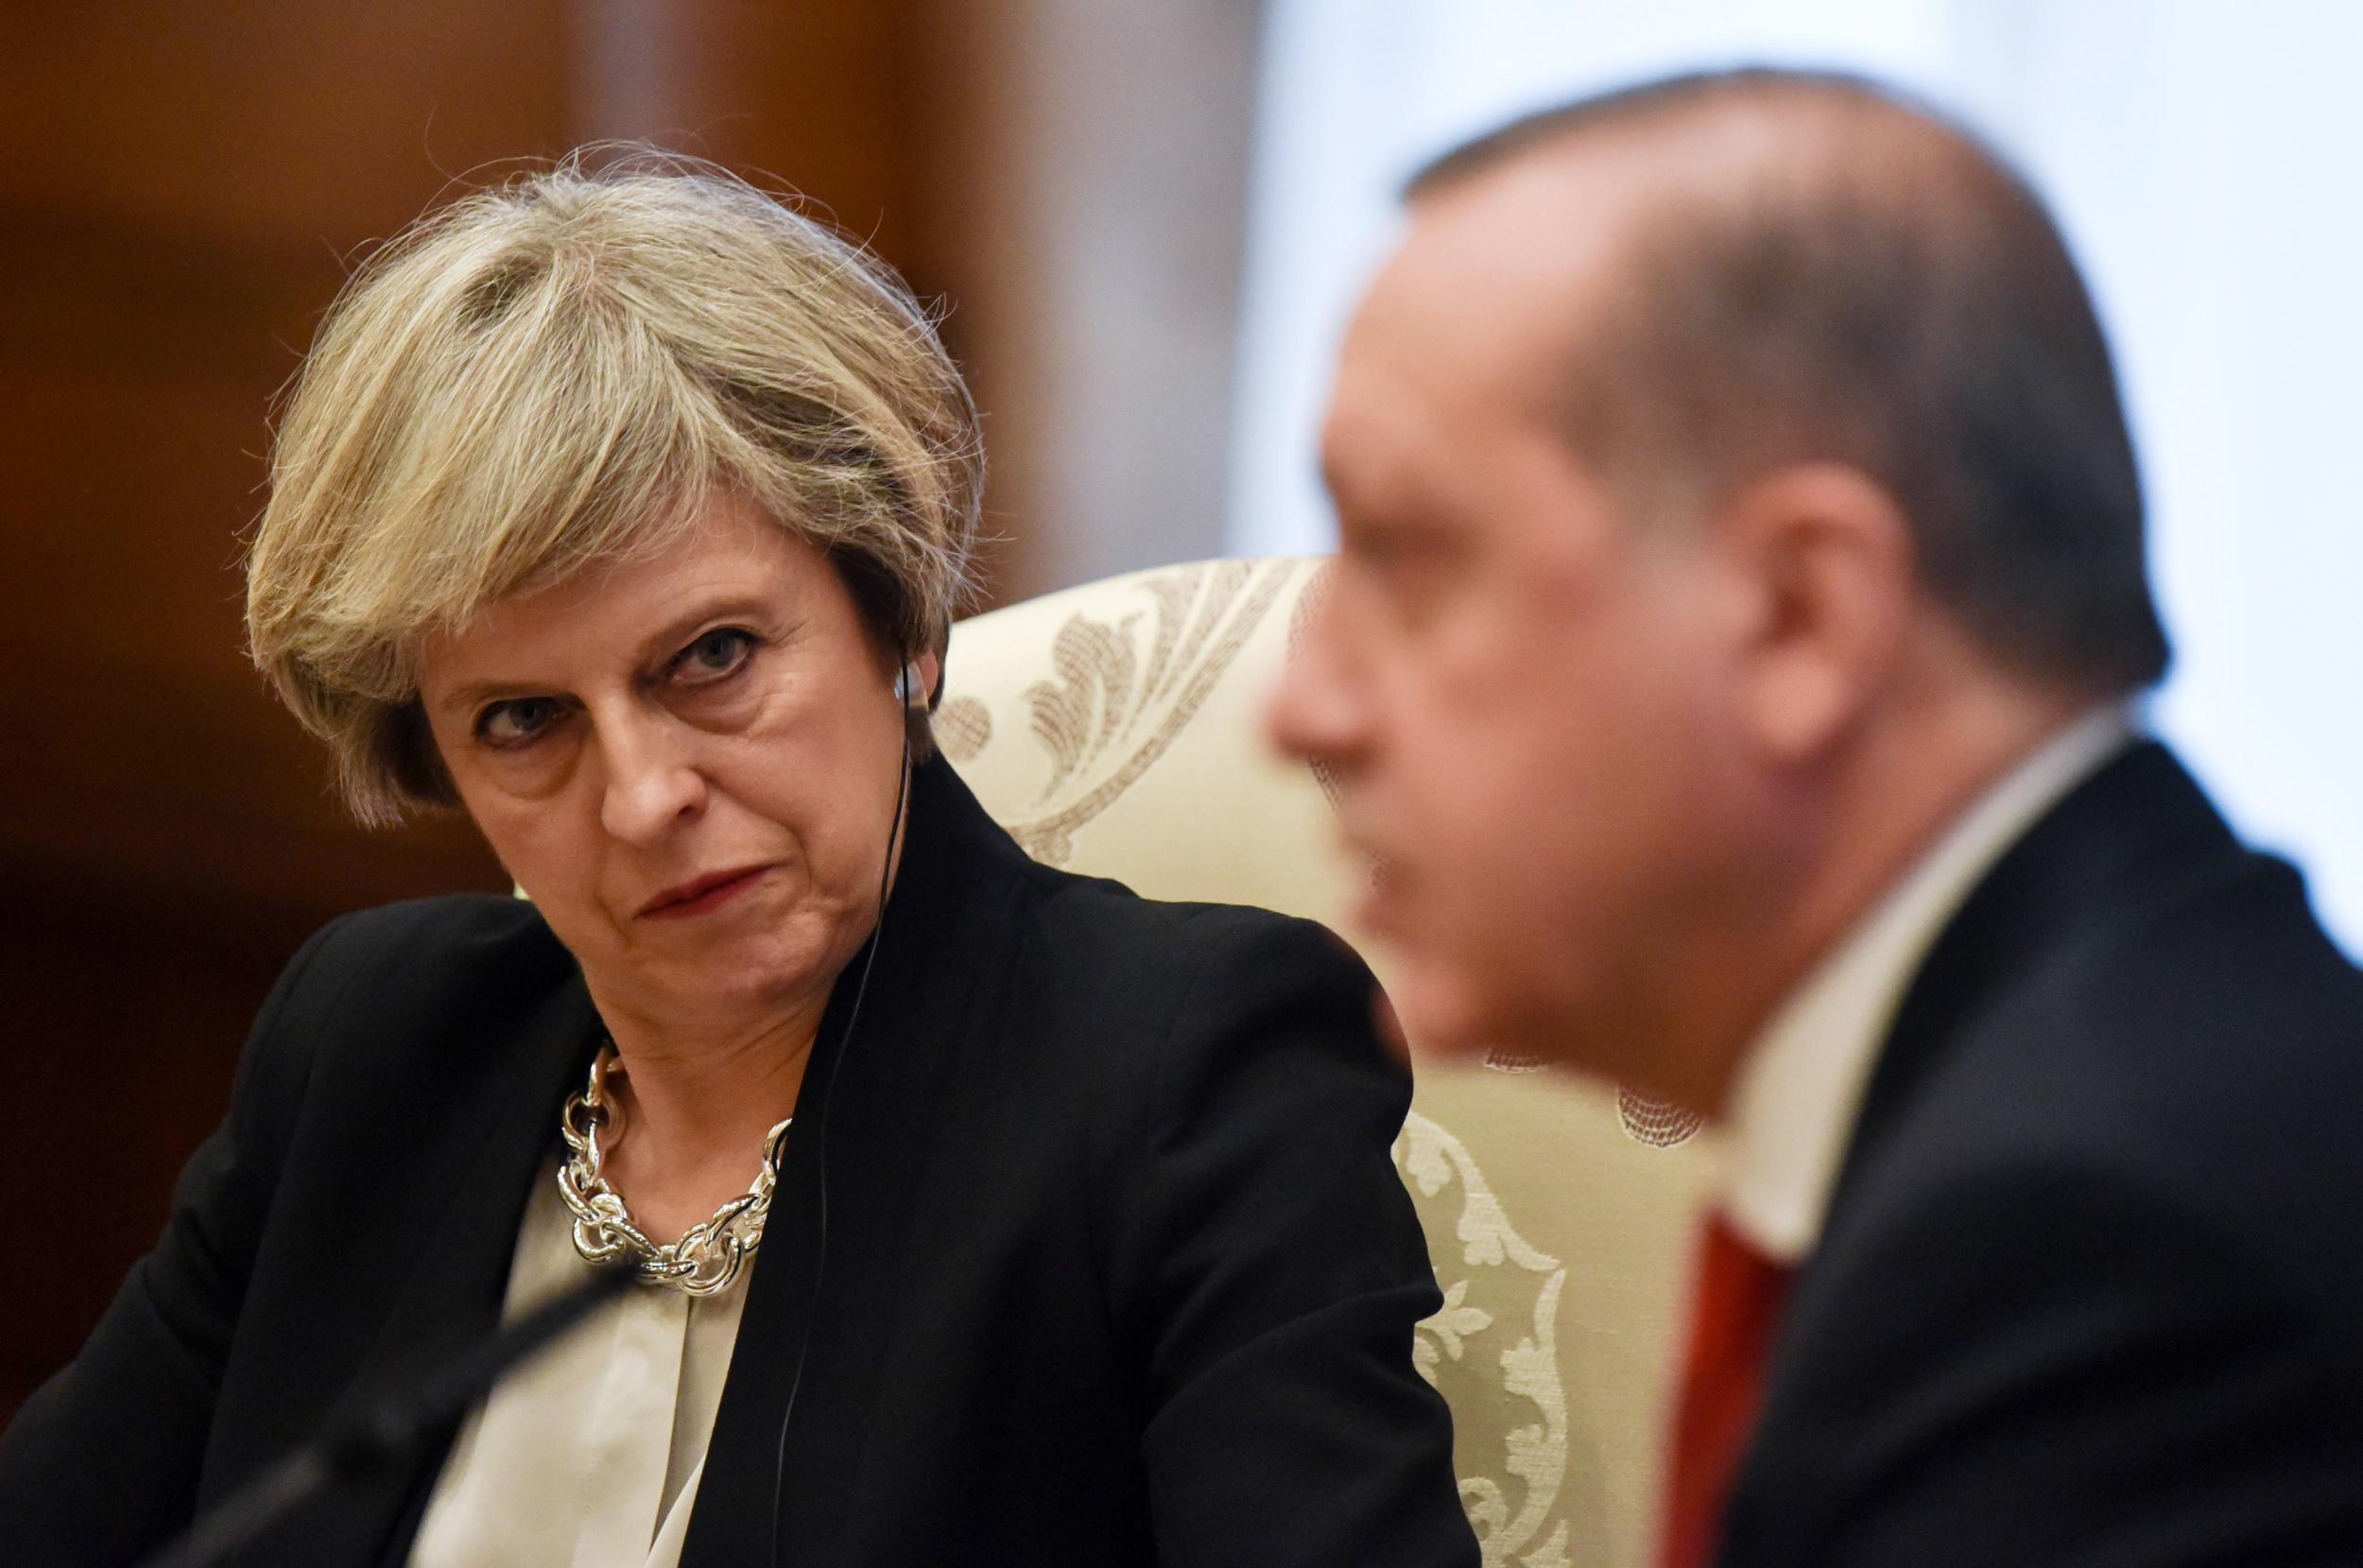 Theresa May attends a meeting with President Recep Tayyip Erdogan